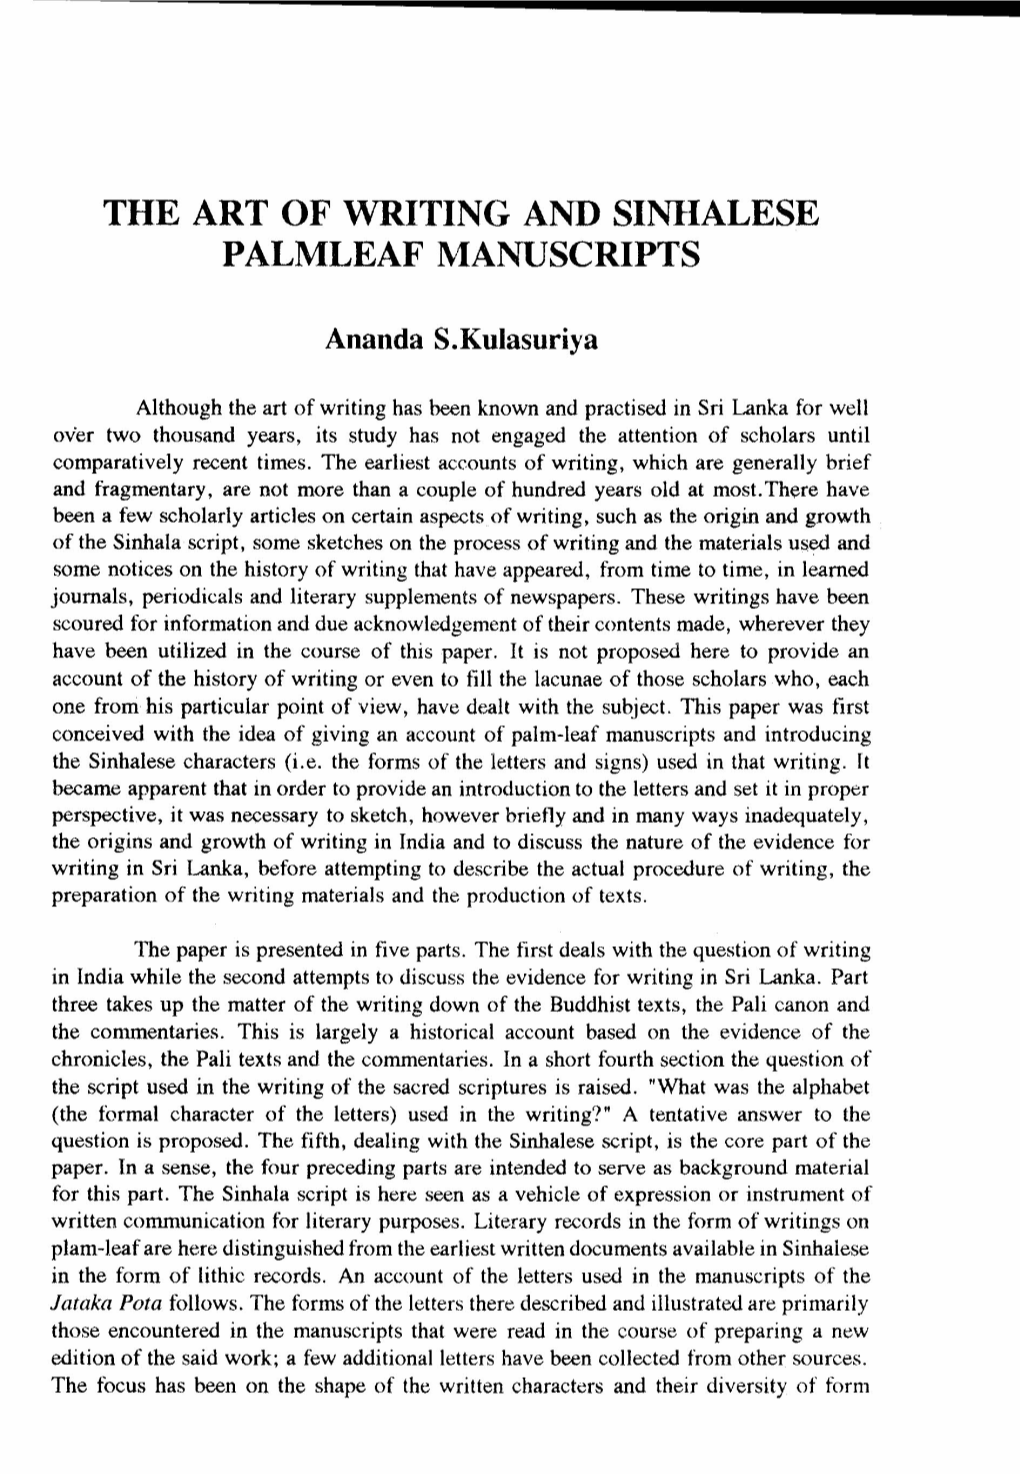 THE ART of WRITING and Sinlialese PALMLEAF L\:IANUSCRIPTS